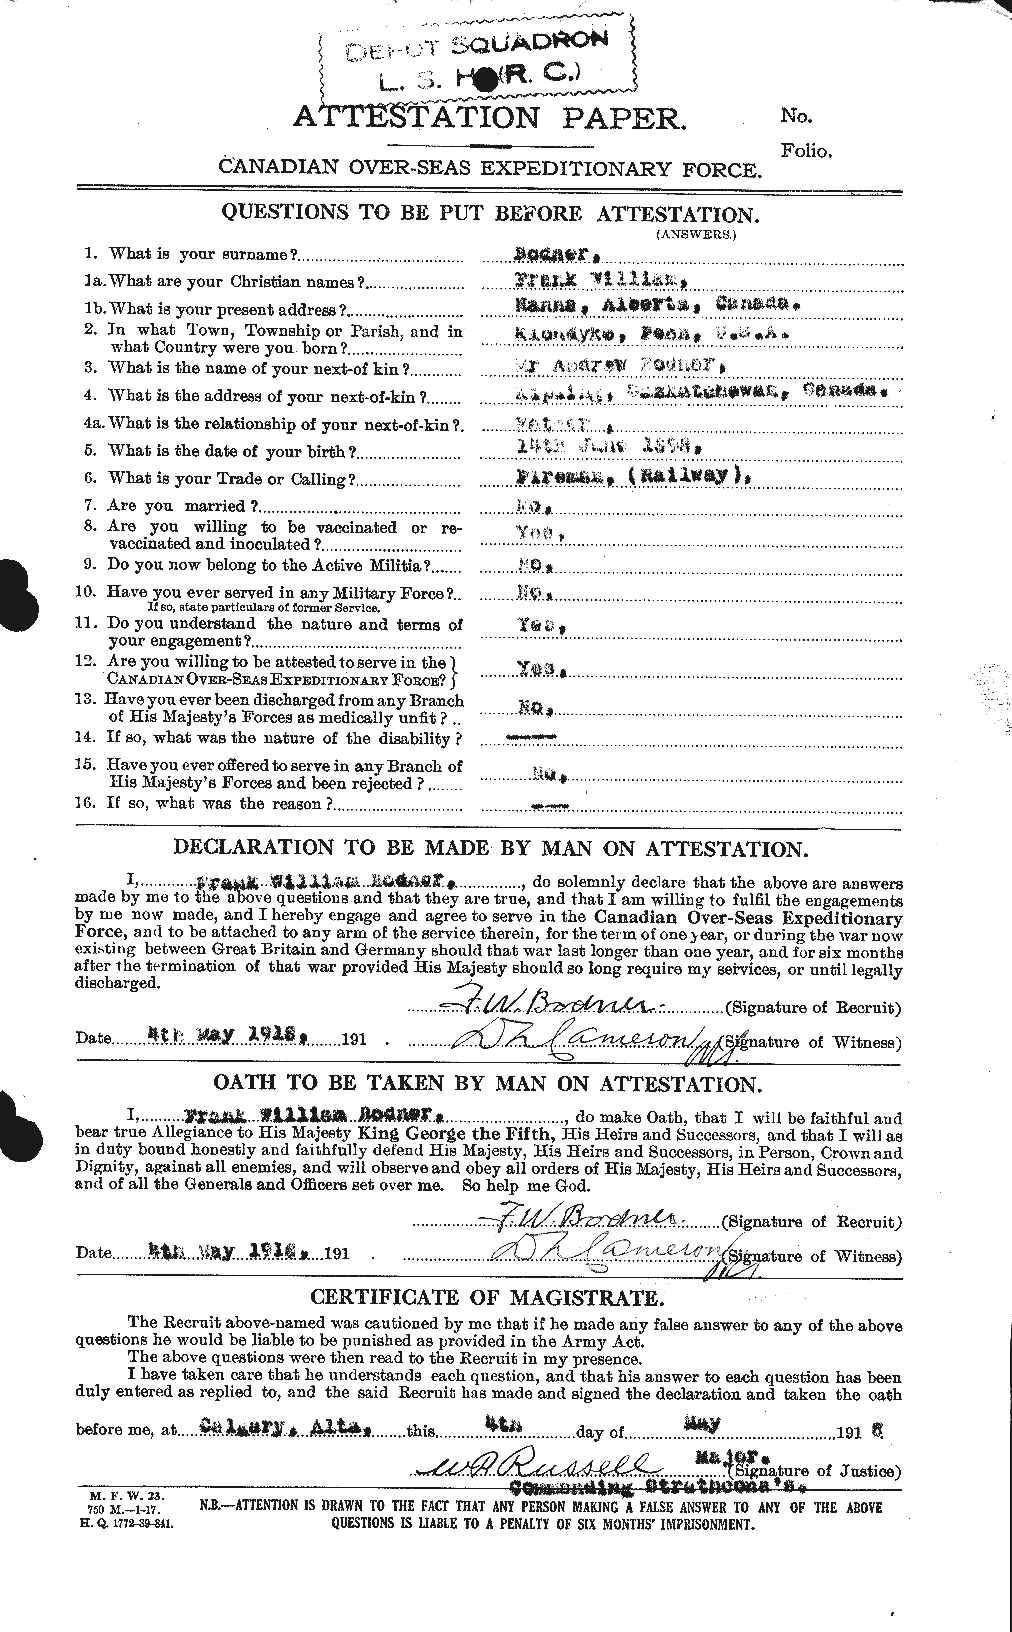 Personnel Records of the First World War - CEF 245130a